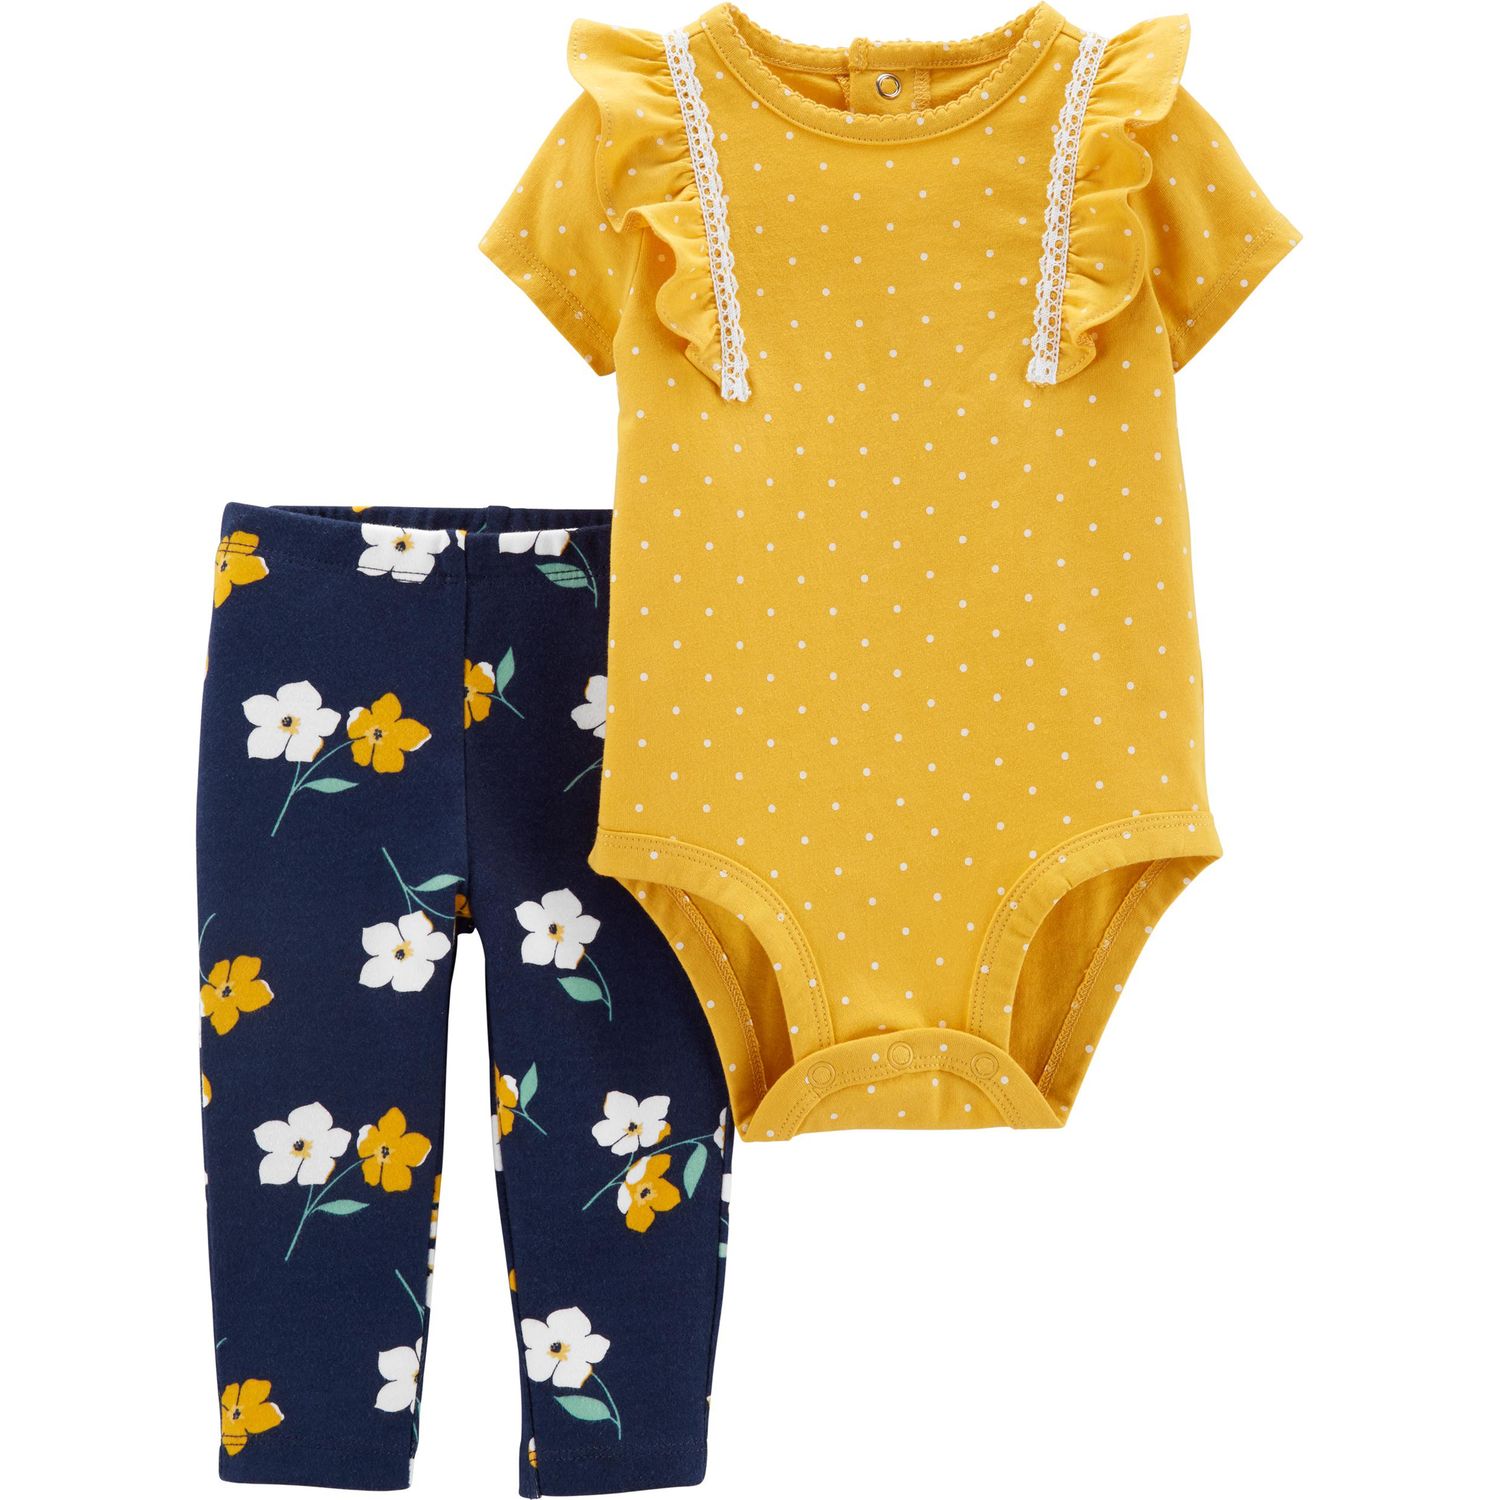 Baby Girl Clothes: Cute Outfits for 